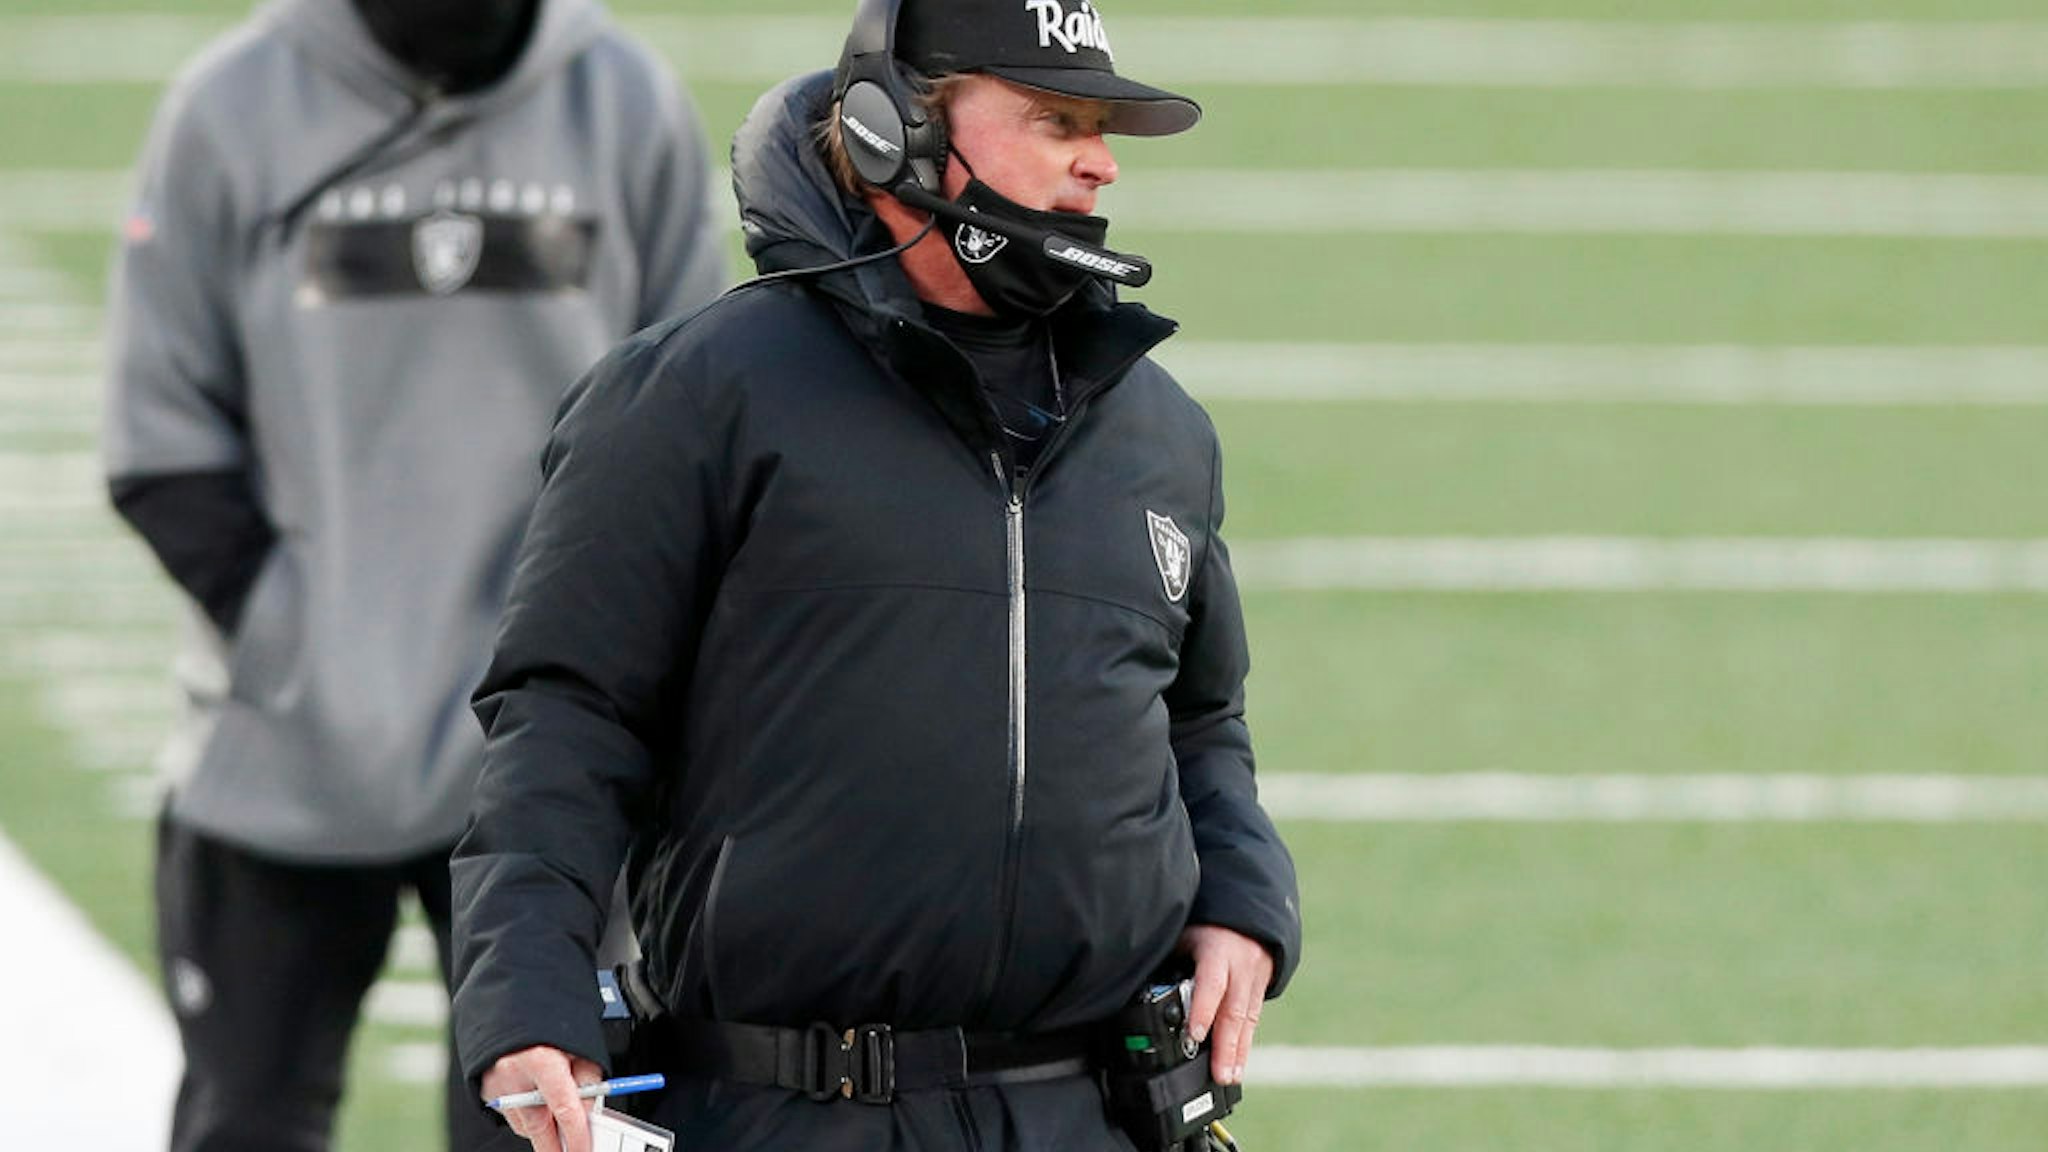 EAST RUTHERFORD, NEW JERSEY - DECEMBER 06: (NEW YORK DAILIES OUT) Head coach Jon Gruden of the Las Vegas Raiders in action against the New York Jets at MetLife Stadium on December 06, 2020 in East Rutherford, New Jersey. The Raiders defeated the Jets 31-28. (Photo by Jim McIsaac/Getty Images)